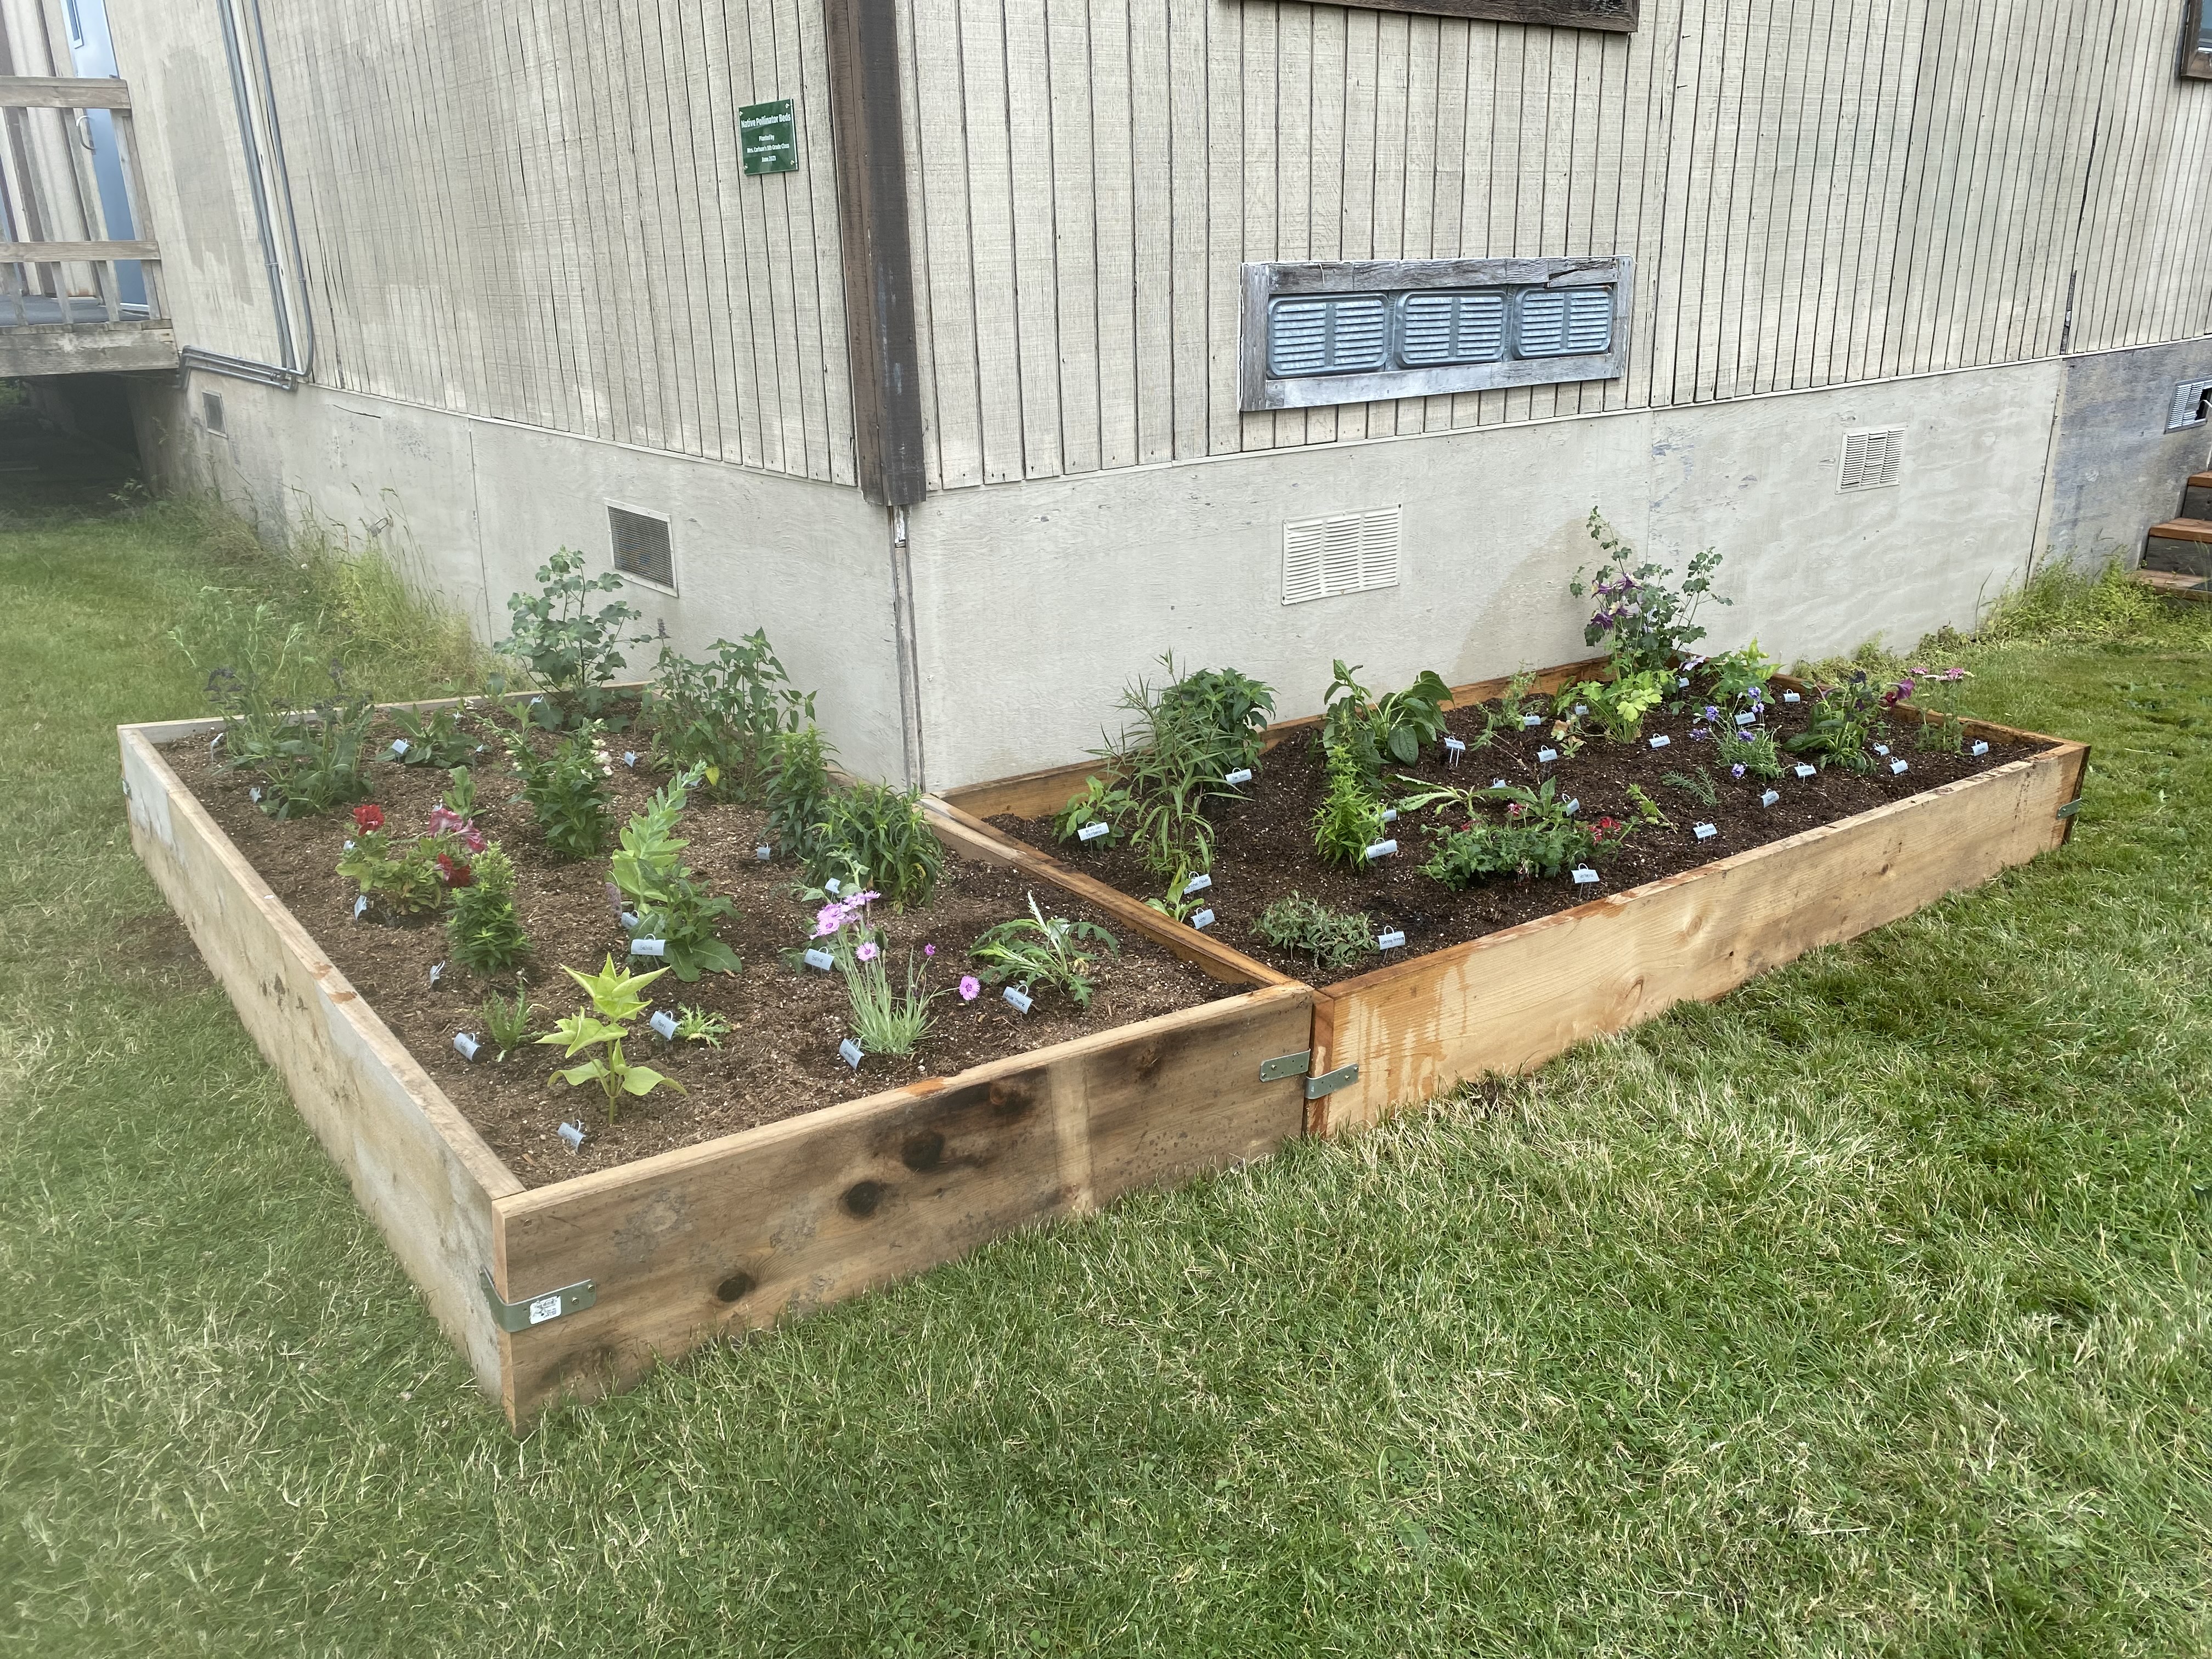 Picture of garden box with plants.